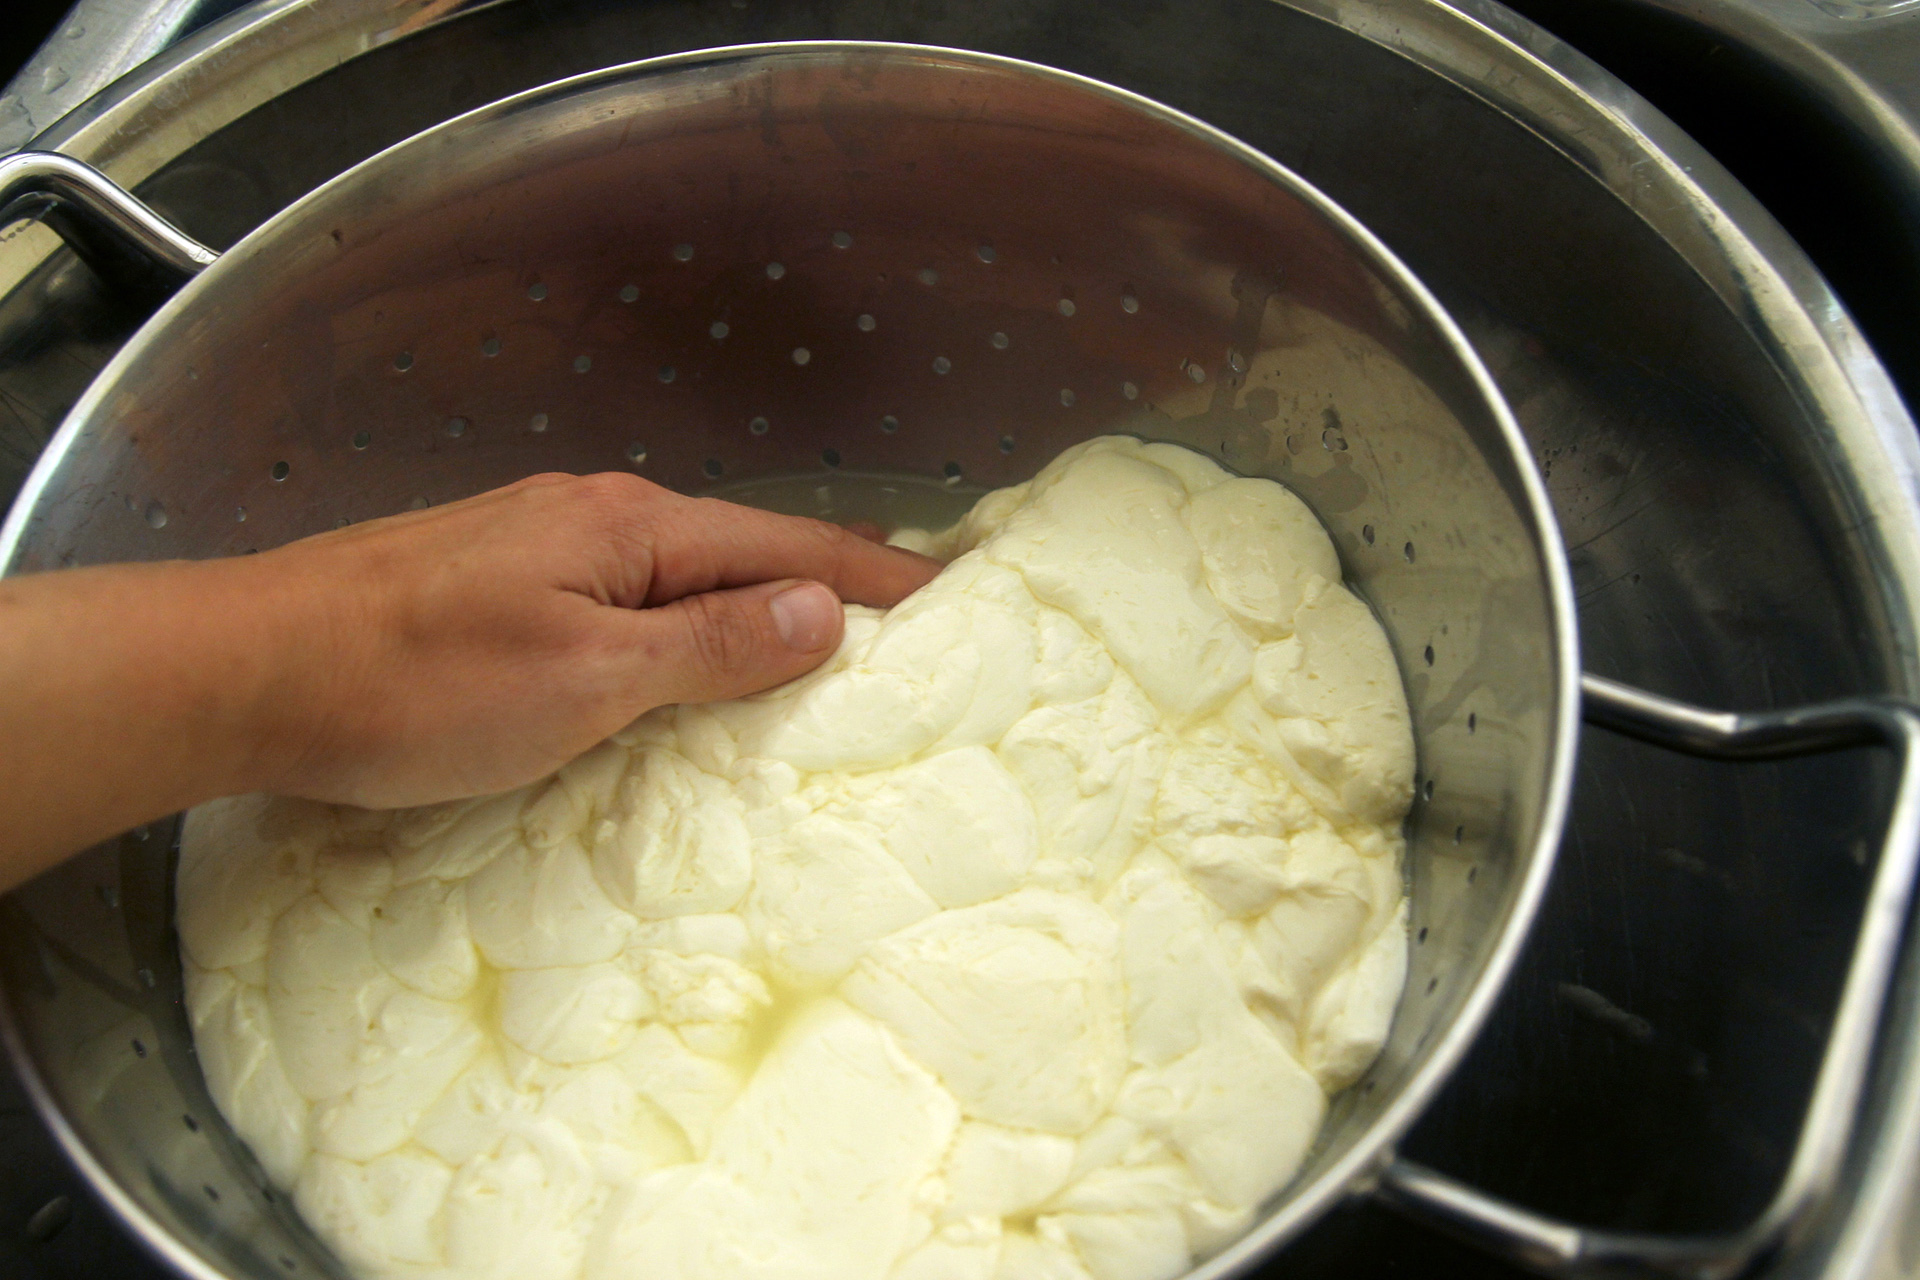 Gently press on the curds to encourage them to expel whey and form a solid mass.